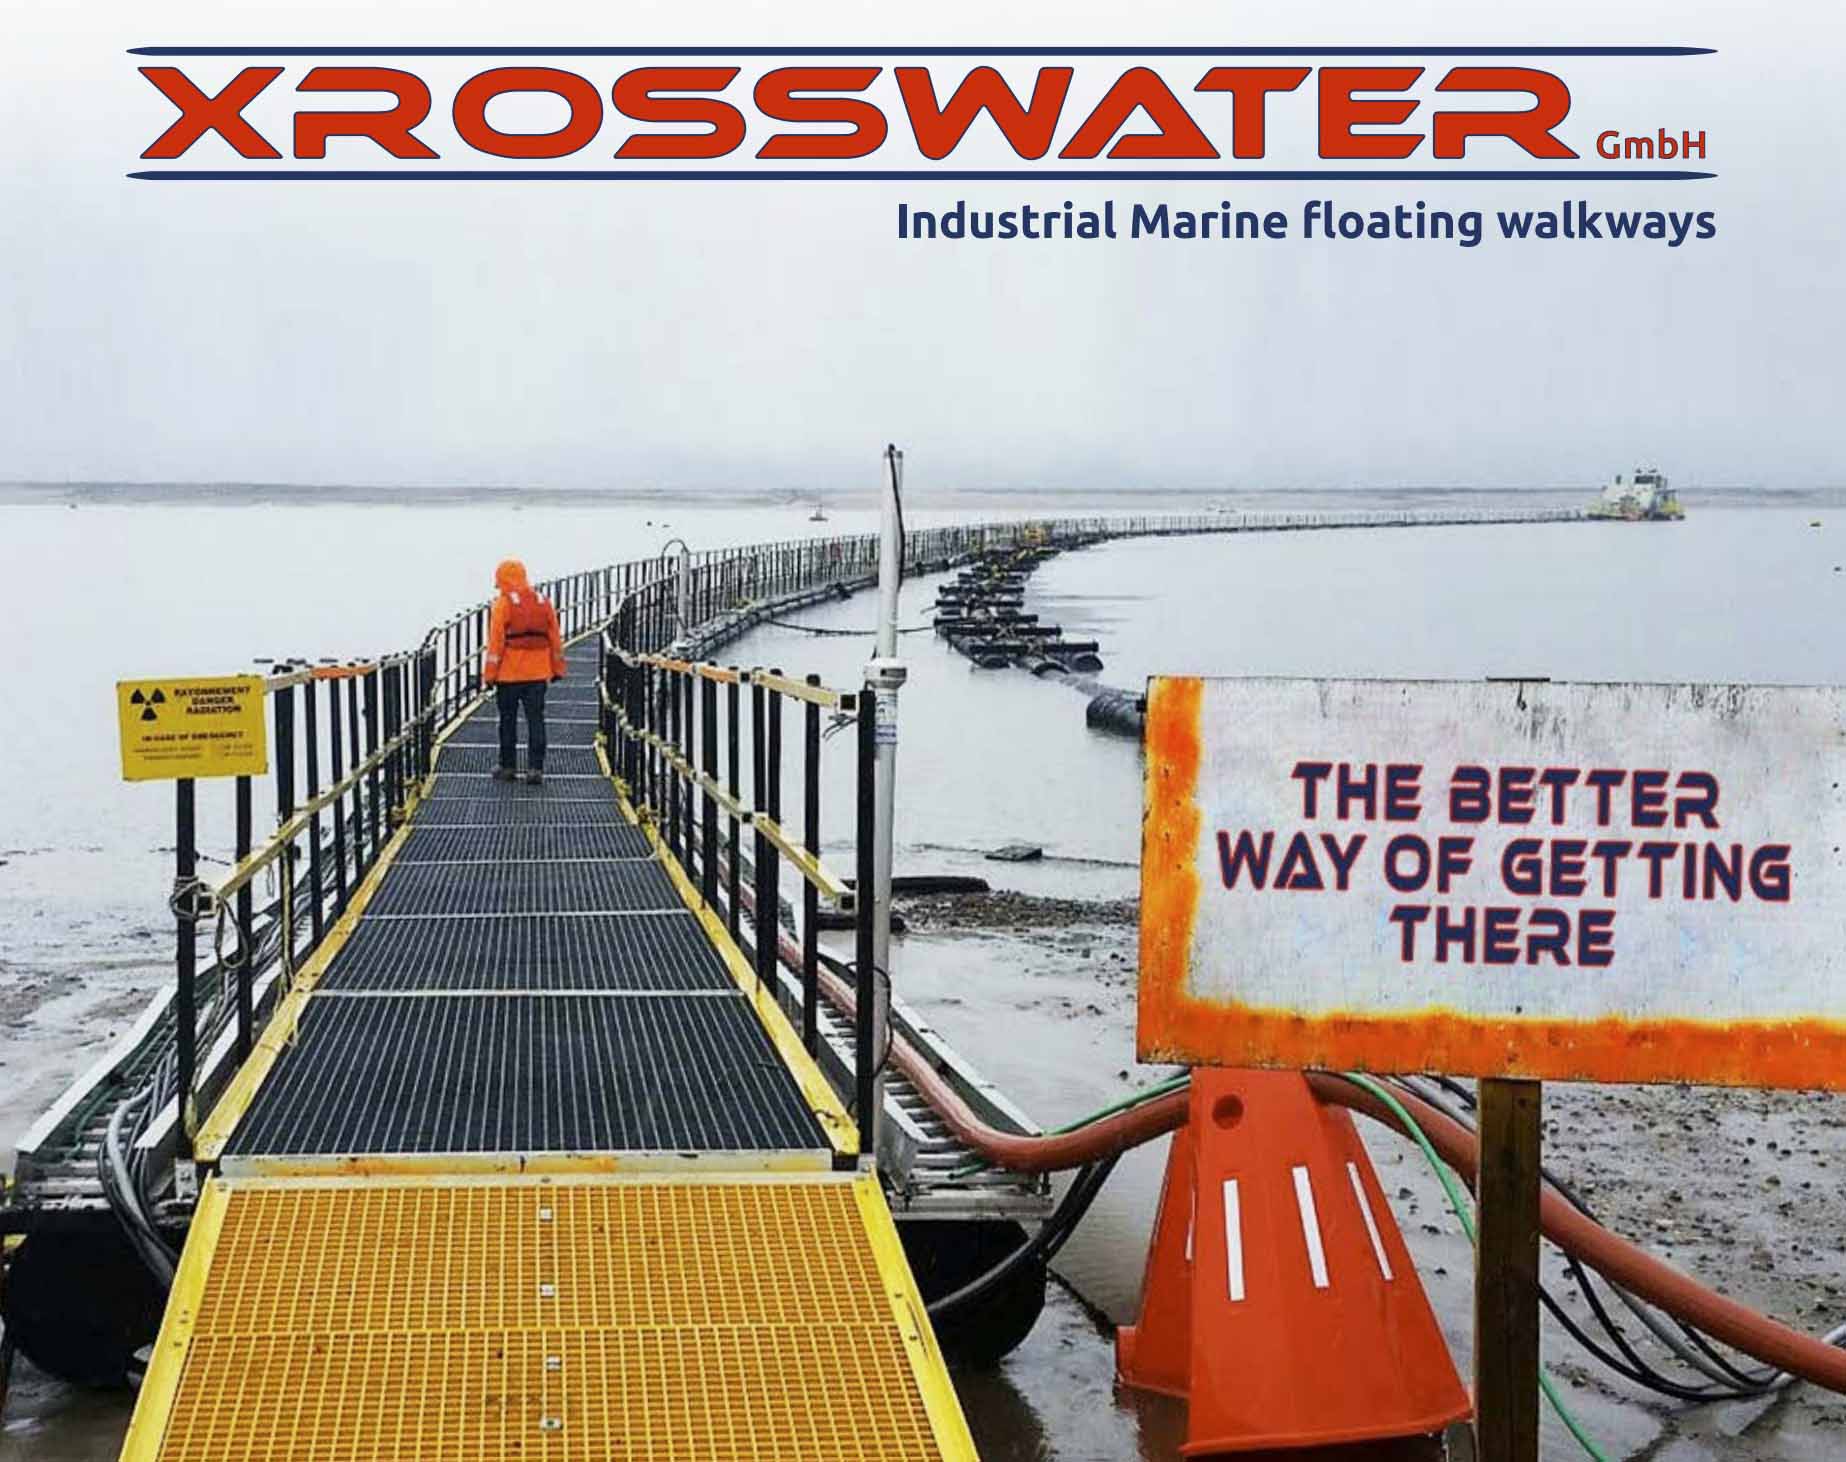 Xrosswater walkways for oil tailings ponds in Canada